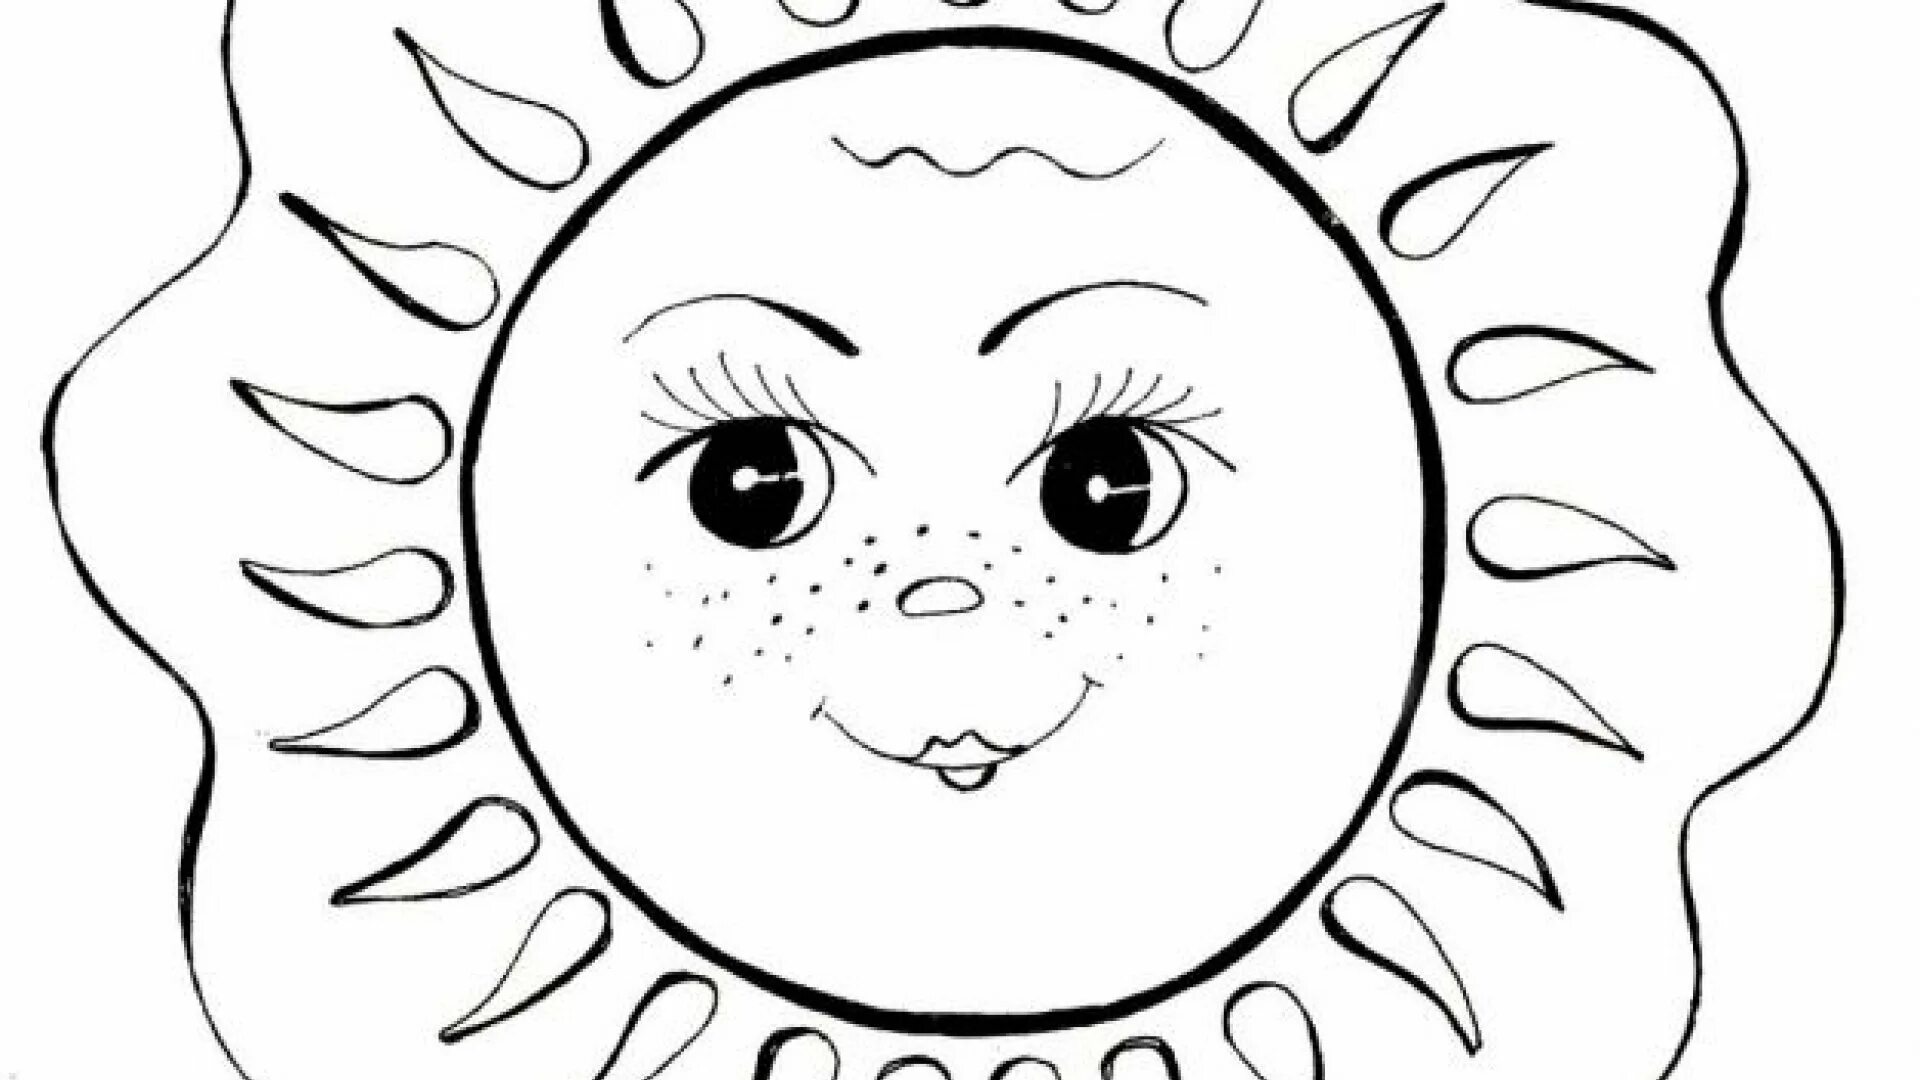 Coloring page spectacular carnival sun